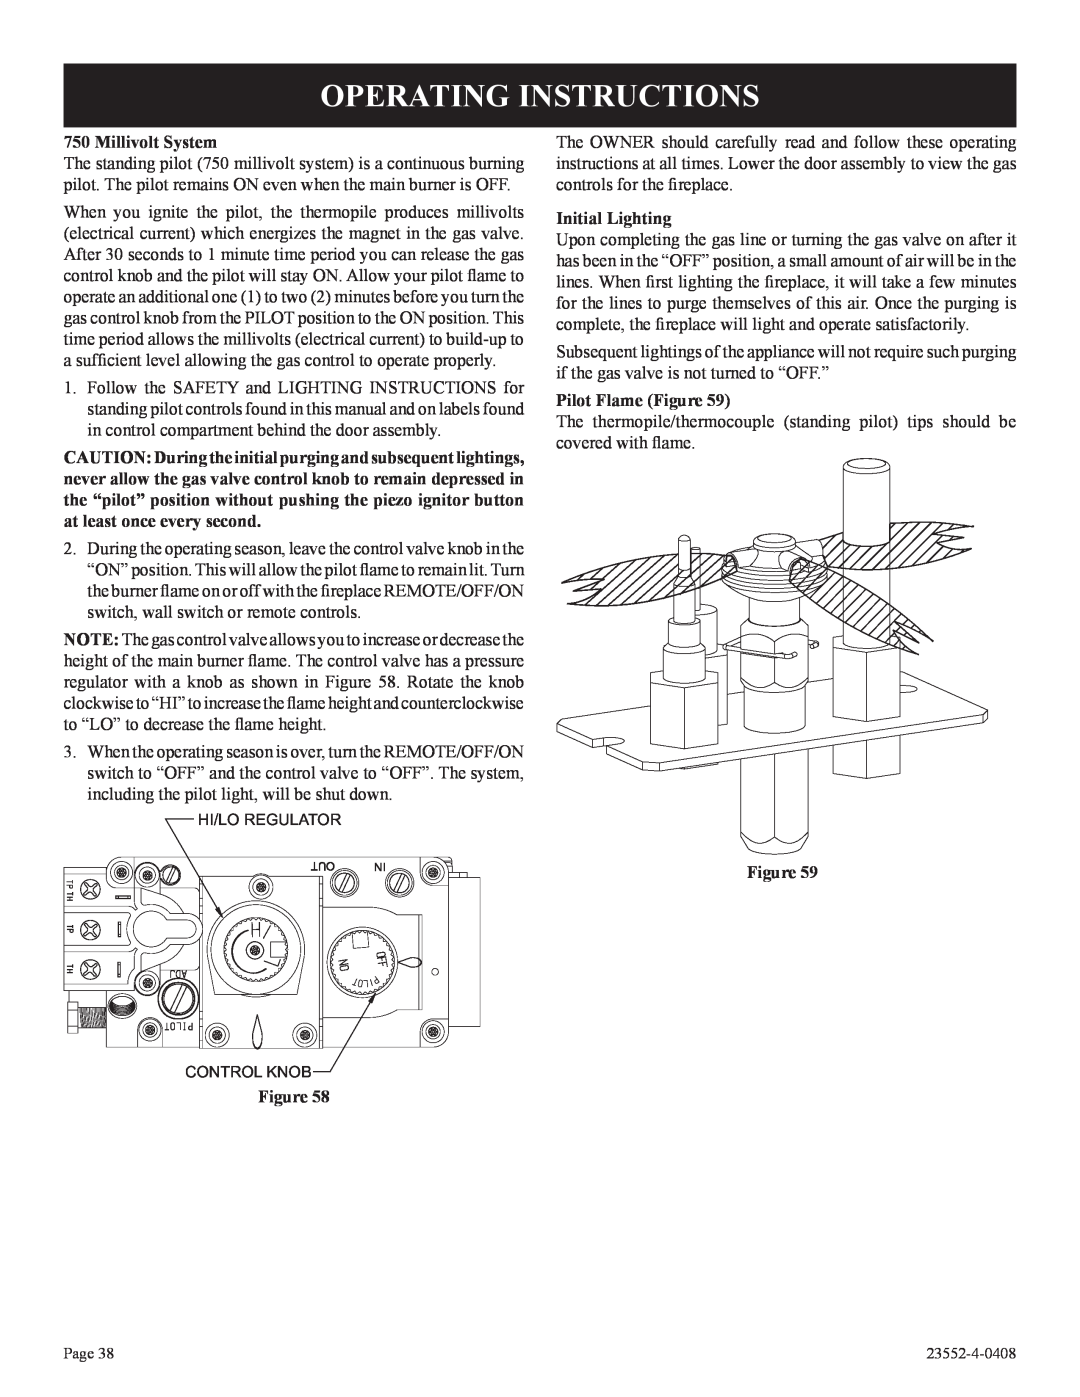 Empire Comfort Systems DVD32FP3, 1, 3)(N Operating Instructions, Millivolt System, Initial Lighting, Pilot Flame Figure 